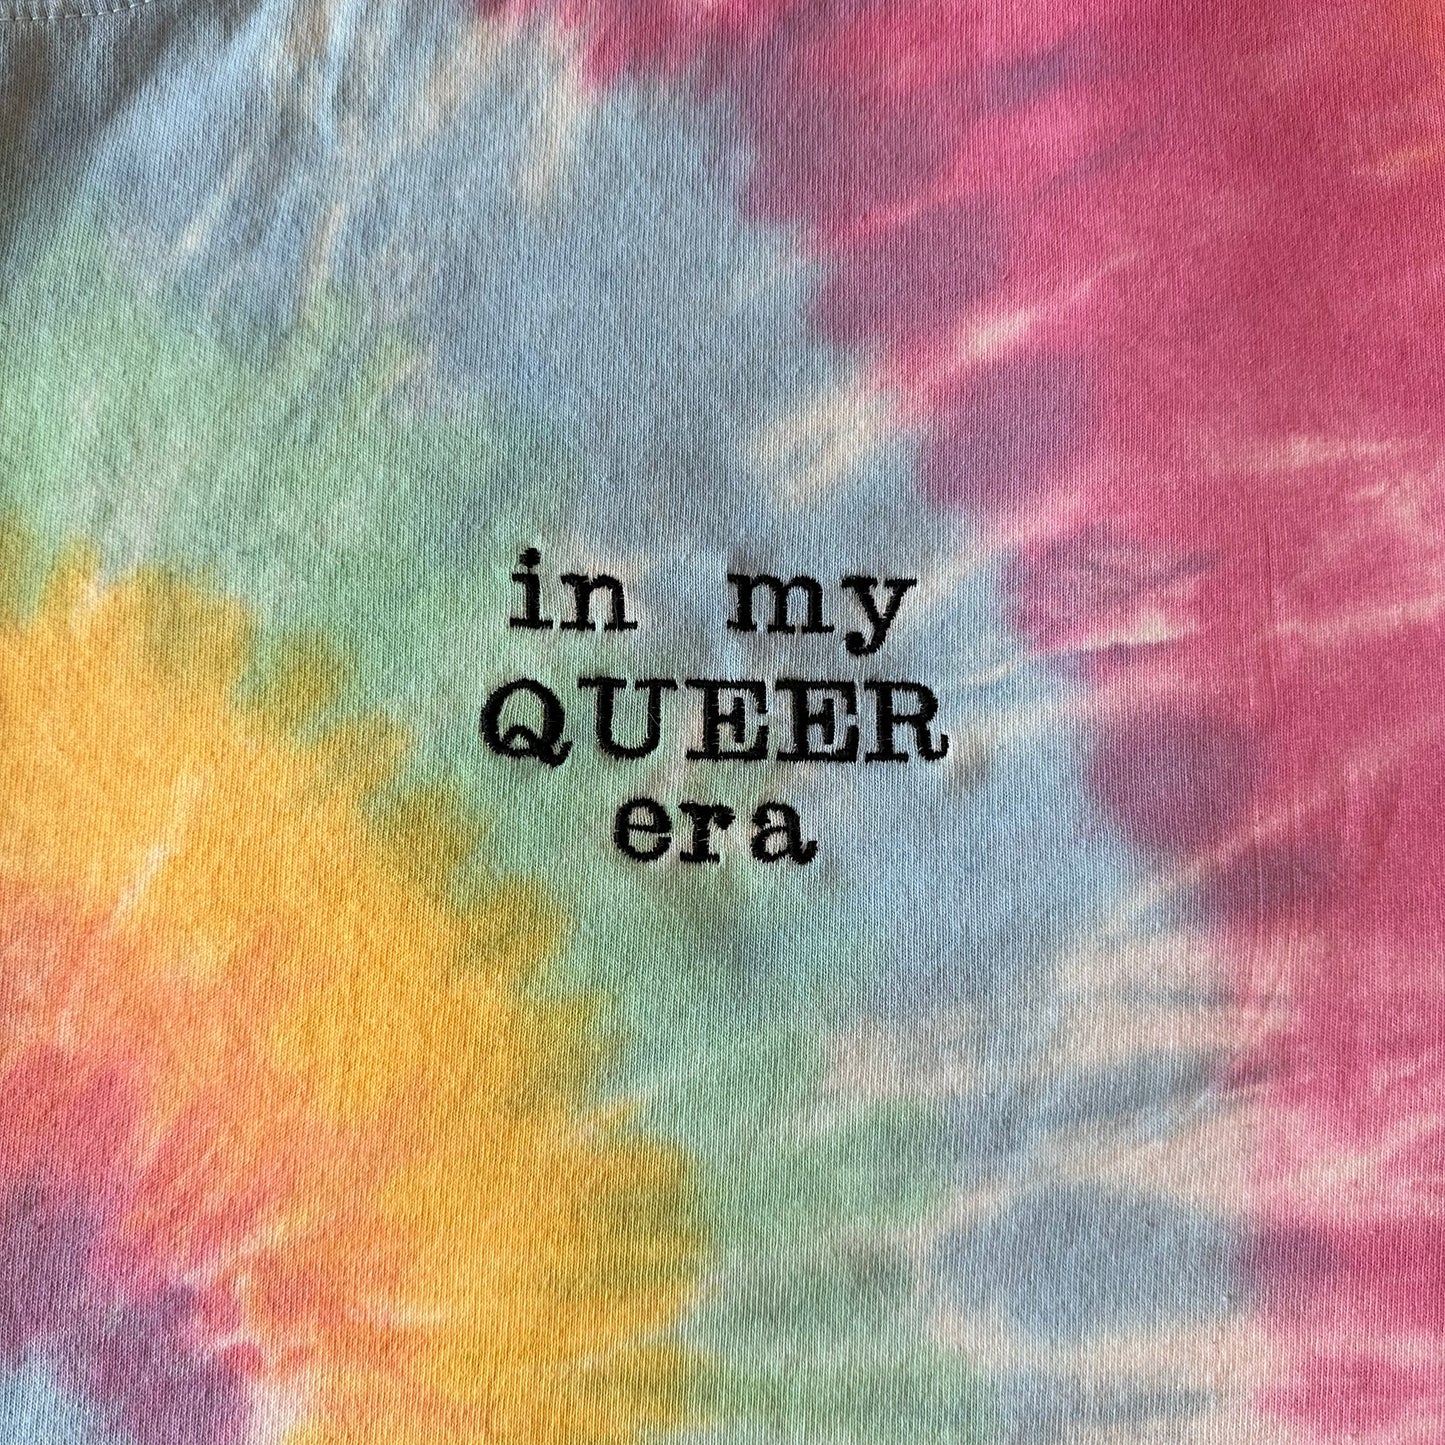 An upclose picture of a pastel tie dye shirt on. Off to the side of the shirt is the phrase "in my queer era" in black embroidery thread.